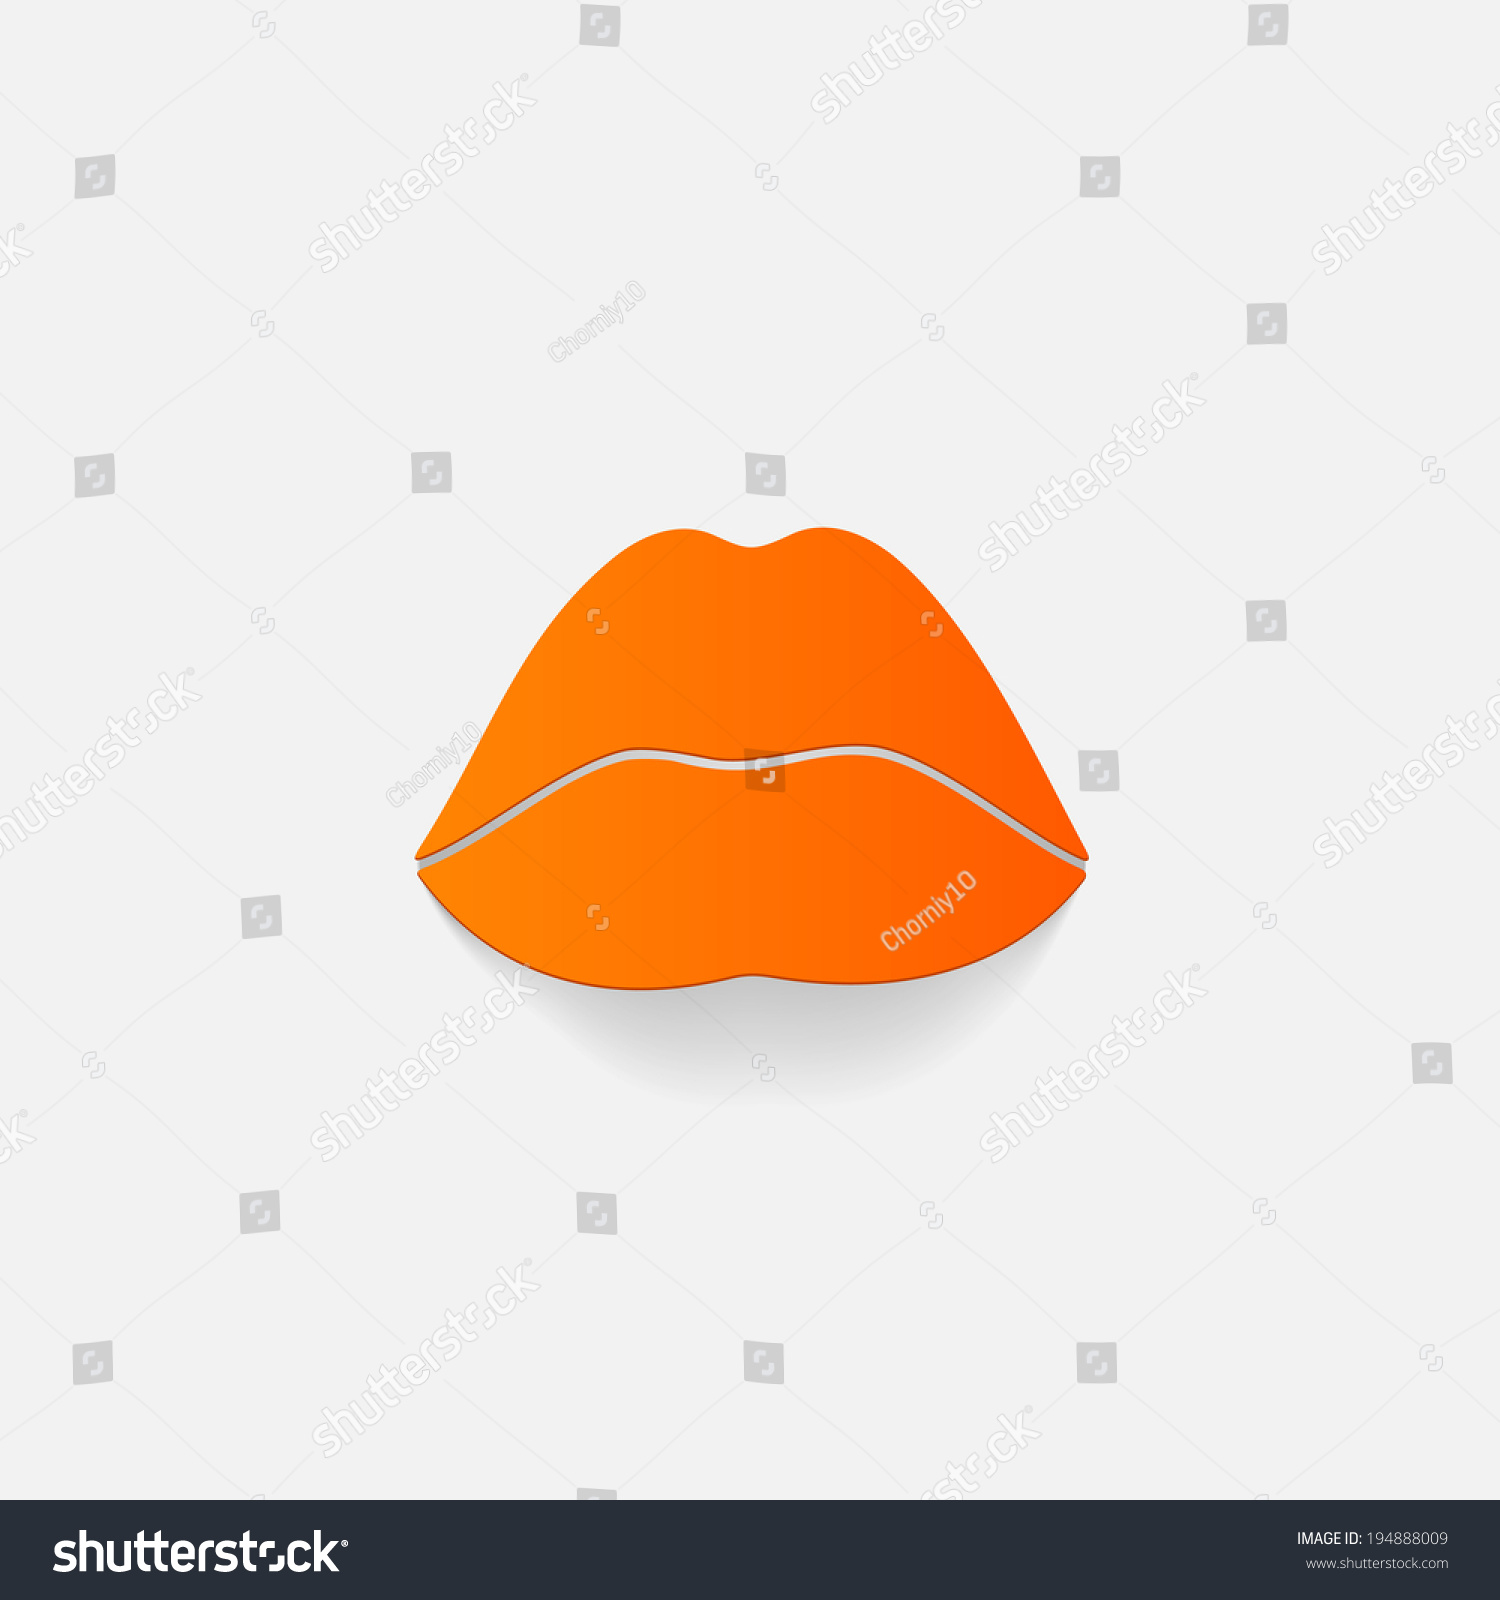 Realistic Paper Sticker Sexy Lips Isolated Stock Vector Royalty Free 194888009 Shutterstock 